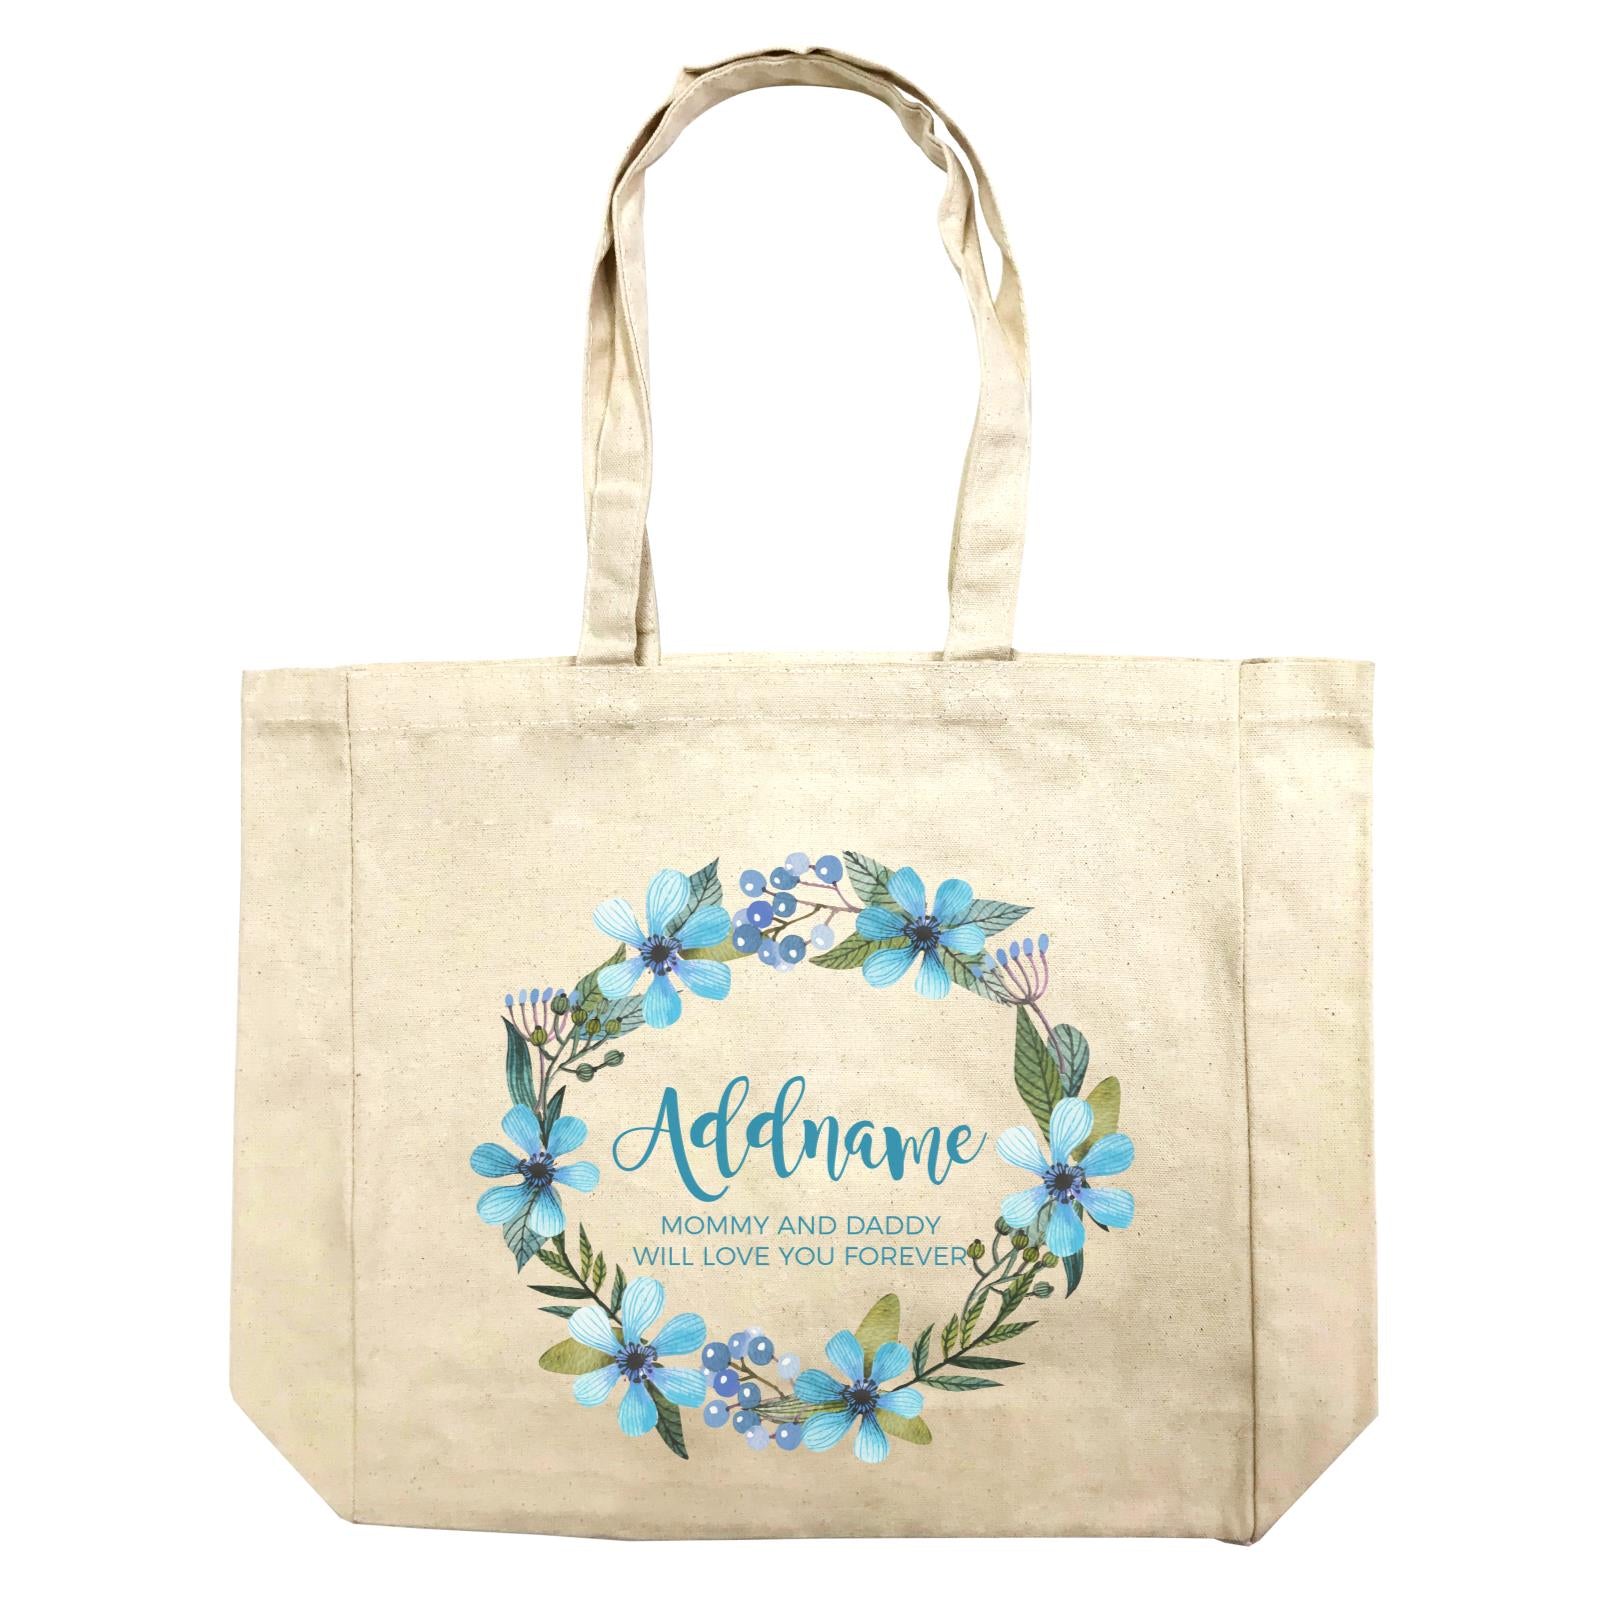 Turqoise Flower Wreath Personalizable with Name and Text Shopping Bag